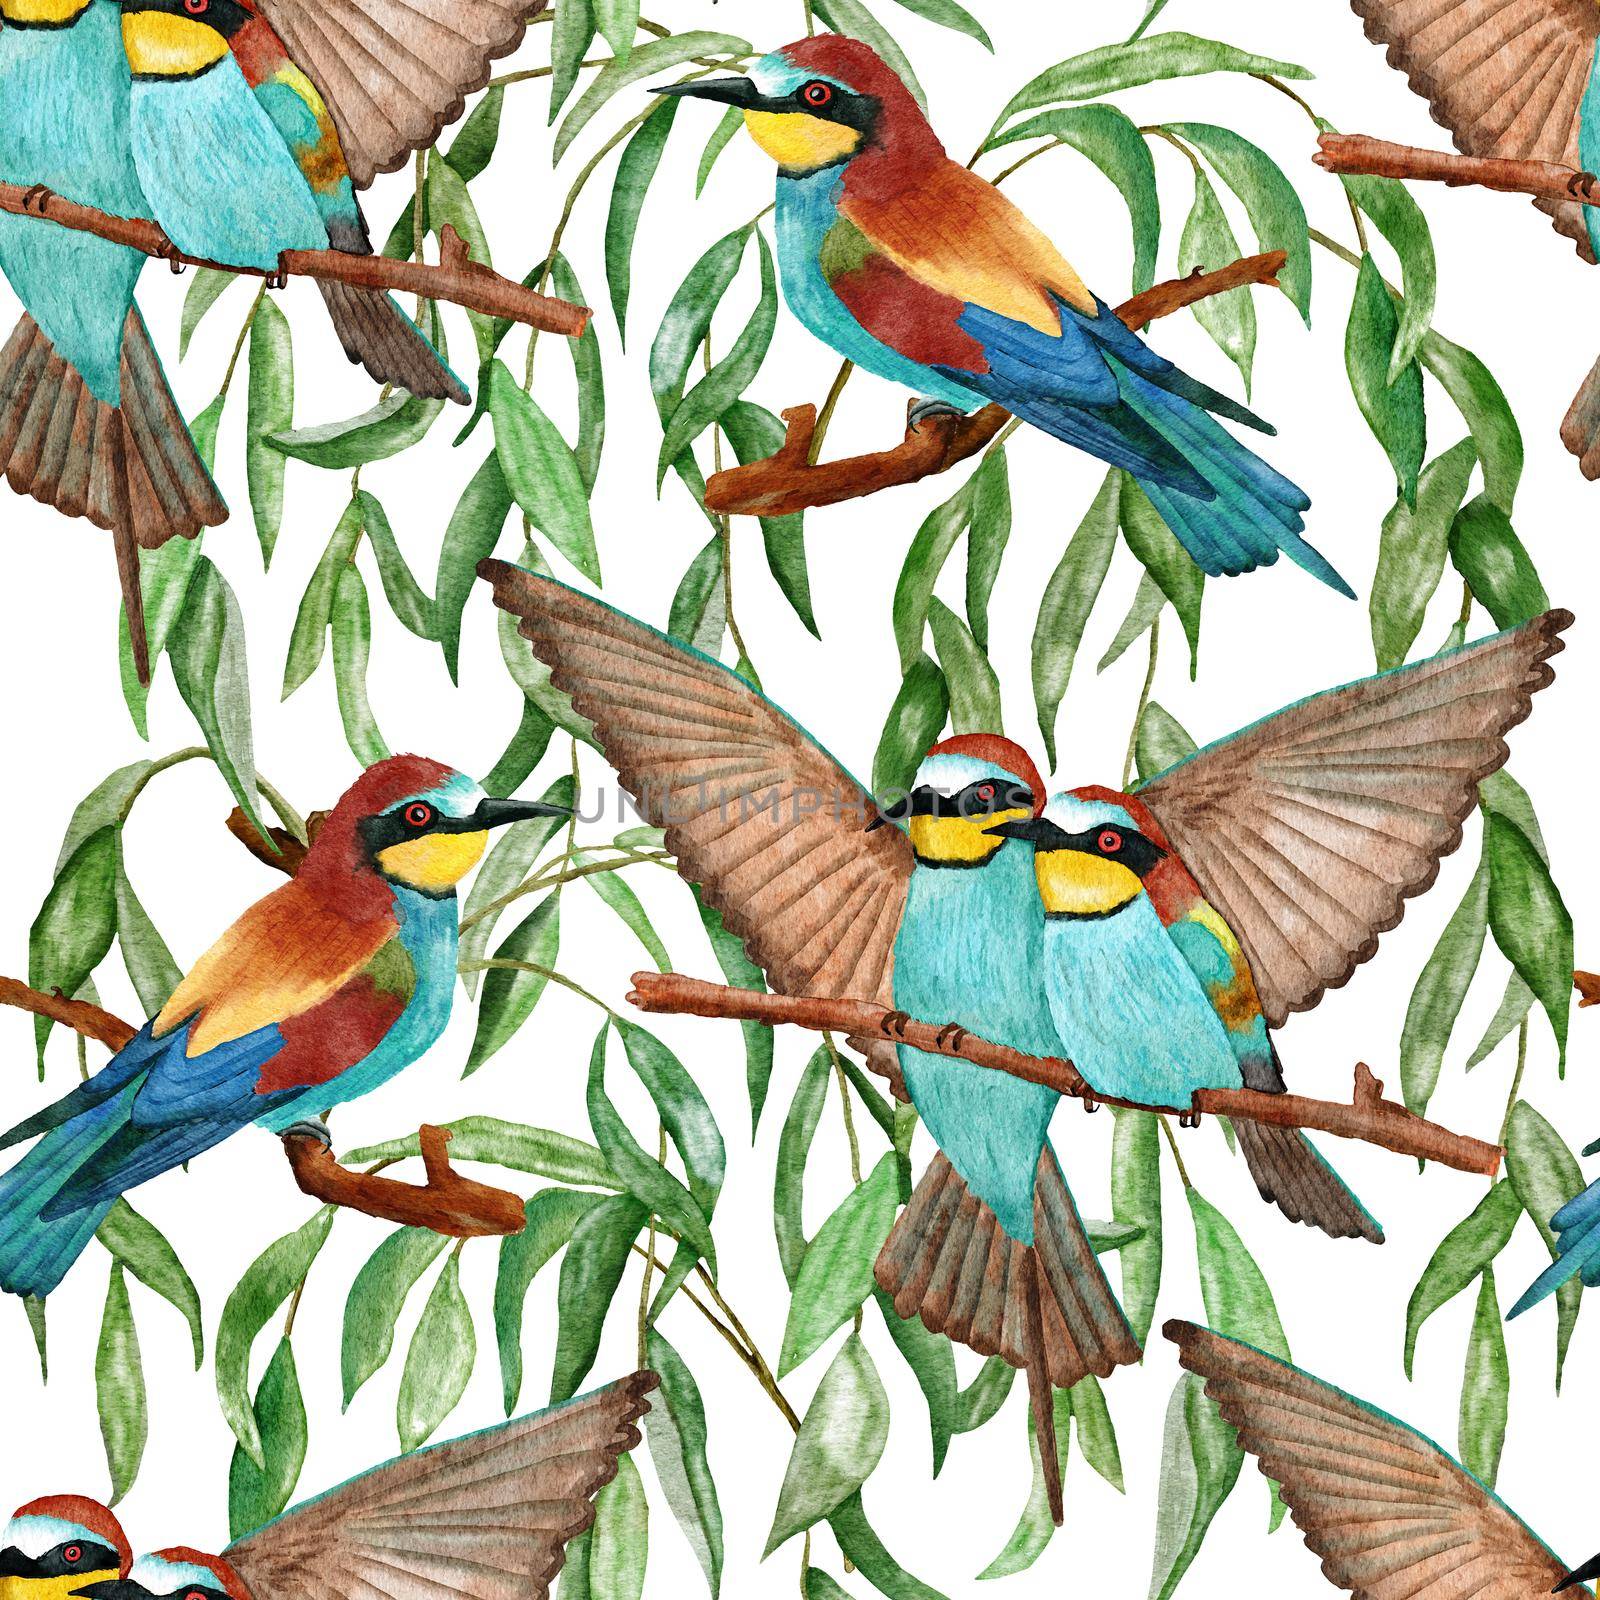 Watercolor seamless hand drawn pattern with kingfisher bee-eater birds in forest woodland. Willife natural vintage background with floral leaves greenery, bird flying design